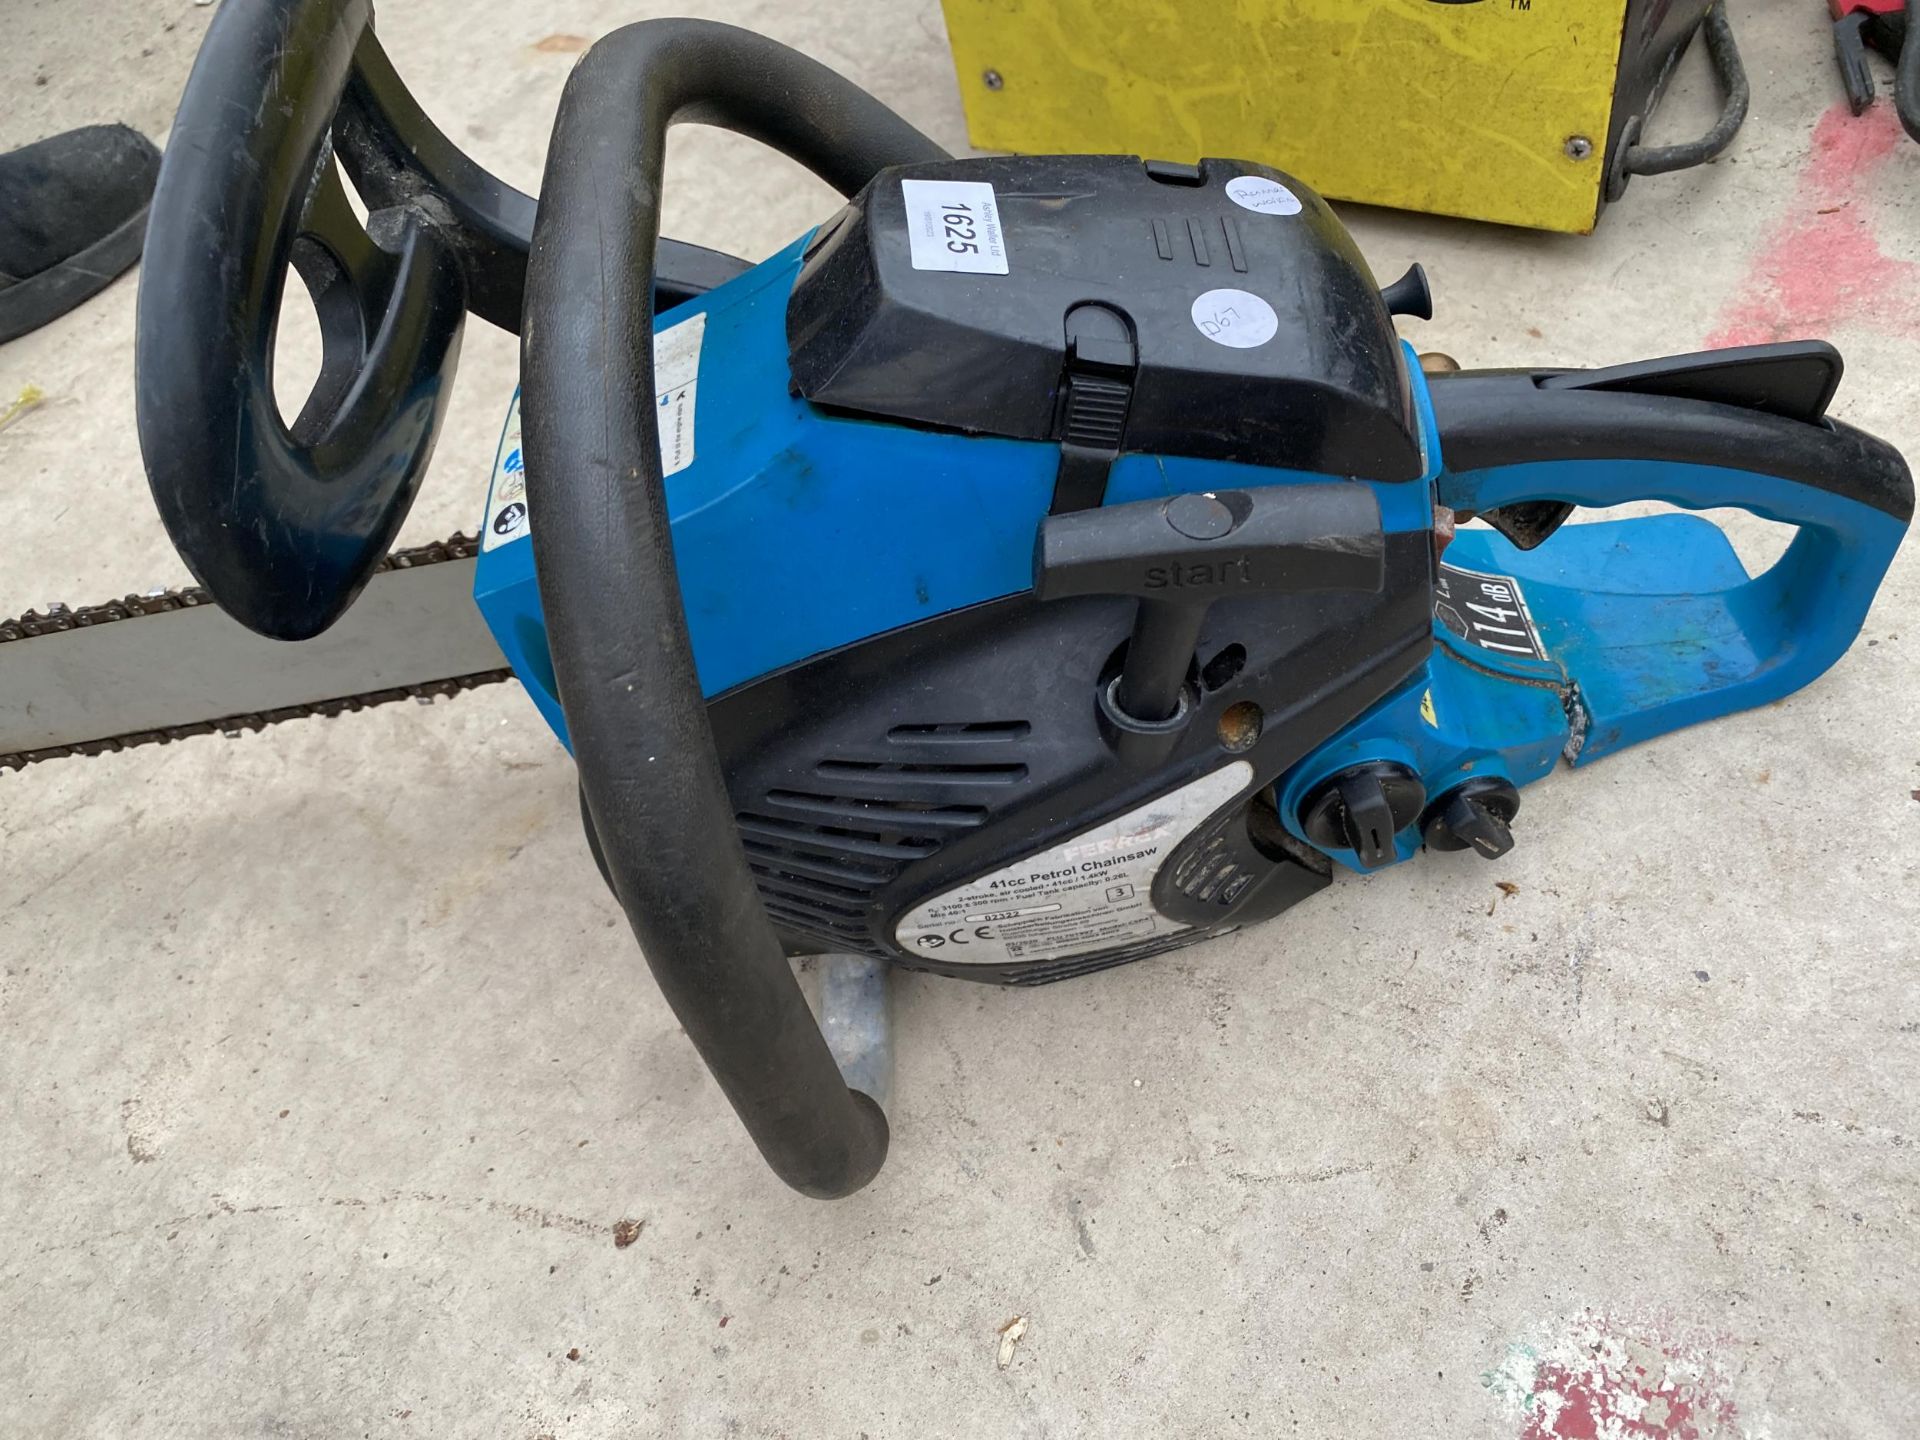 A 41CC PETROL CHAINSAW BELIEVED IN WORKING ORDER BUT NO WARRANTY - Image 2 of 2